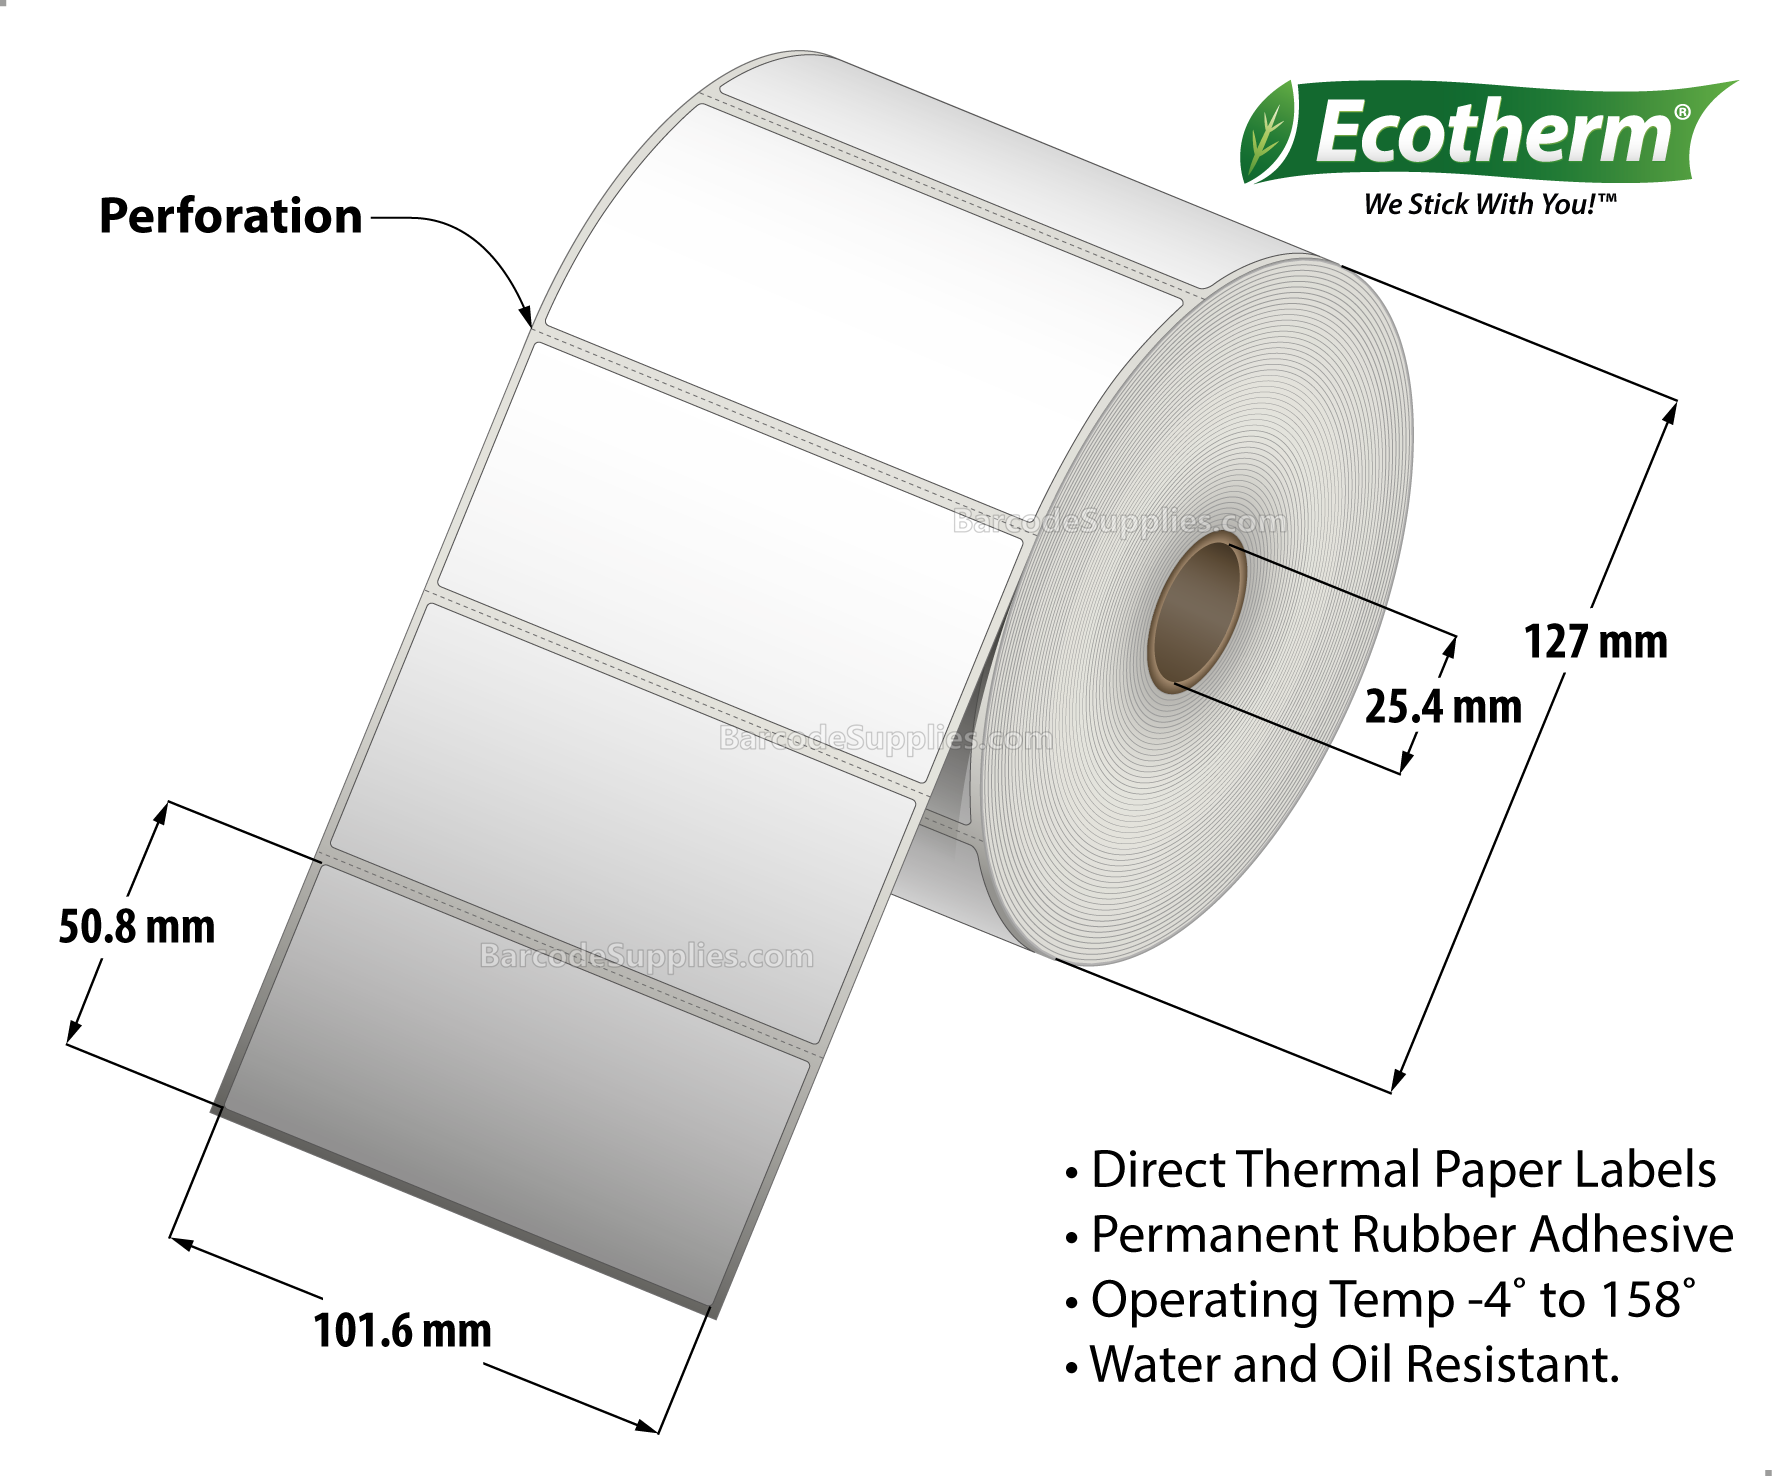 4 x 2 Direct Thermal White Labels With Rubber Adhesive - Perforated - 1250 Labels Per Roll - Carton Of 6 Rolls - 7500 Labels Total - MPN: ECOTHERM15149-6